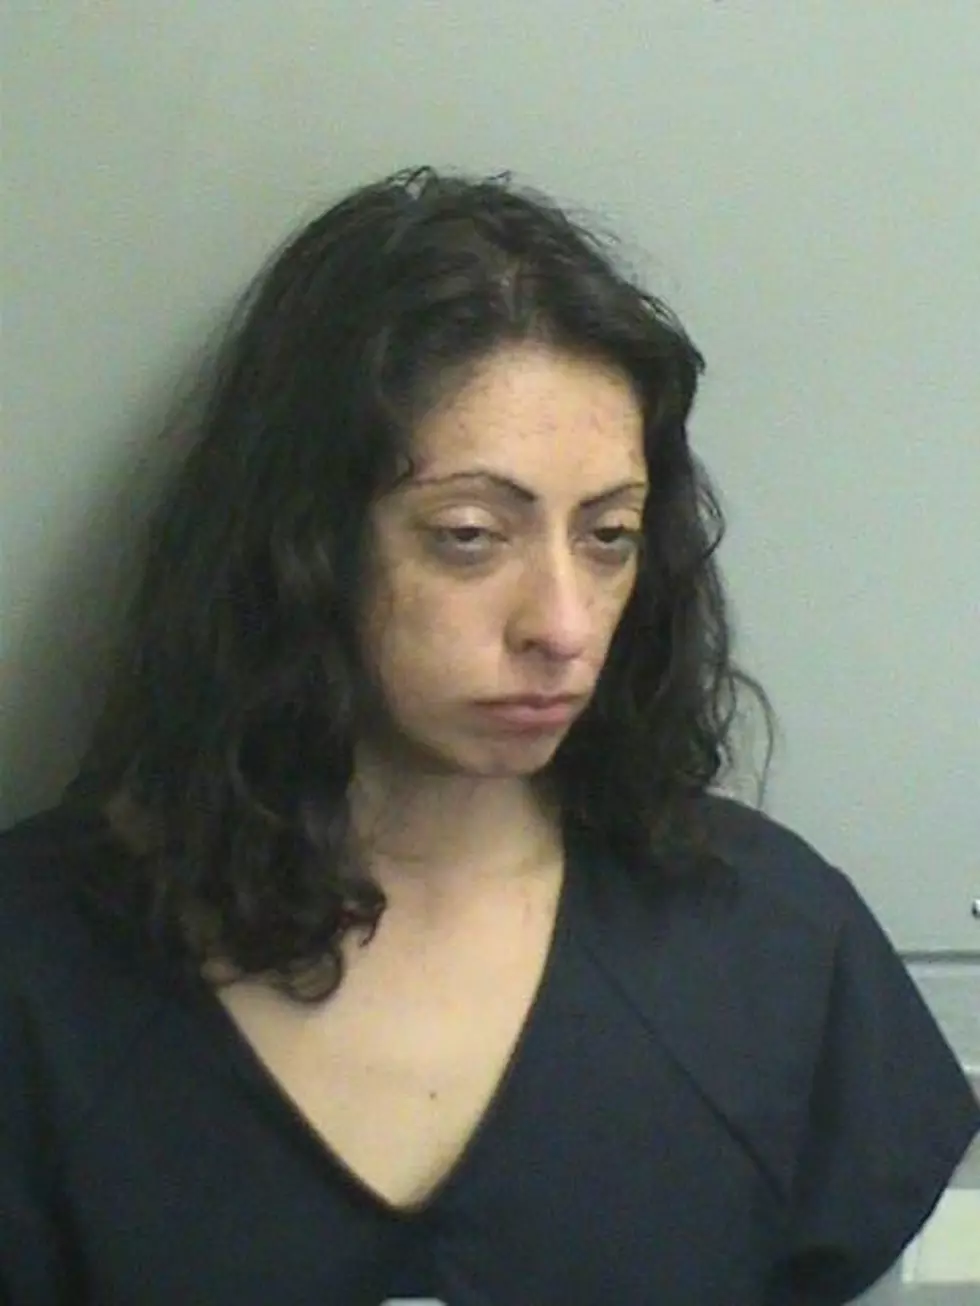 Brick woman facing charges after leading Toms River police on wild chase